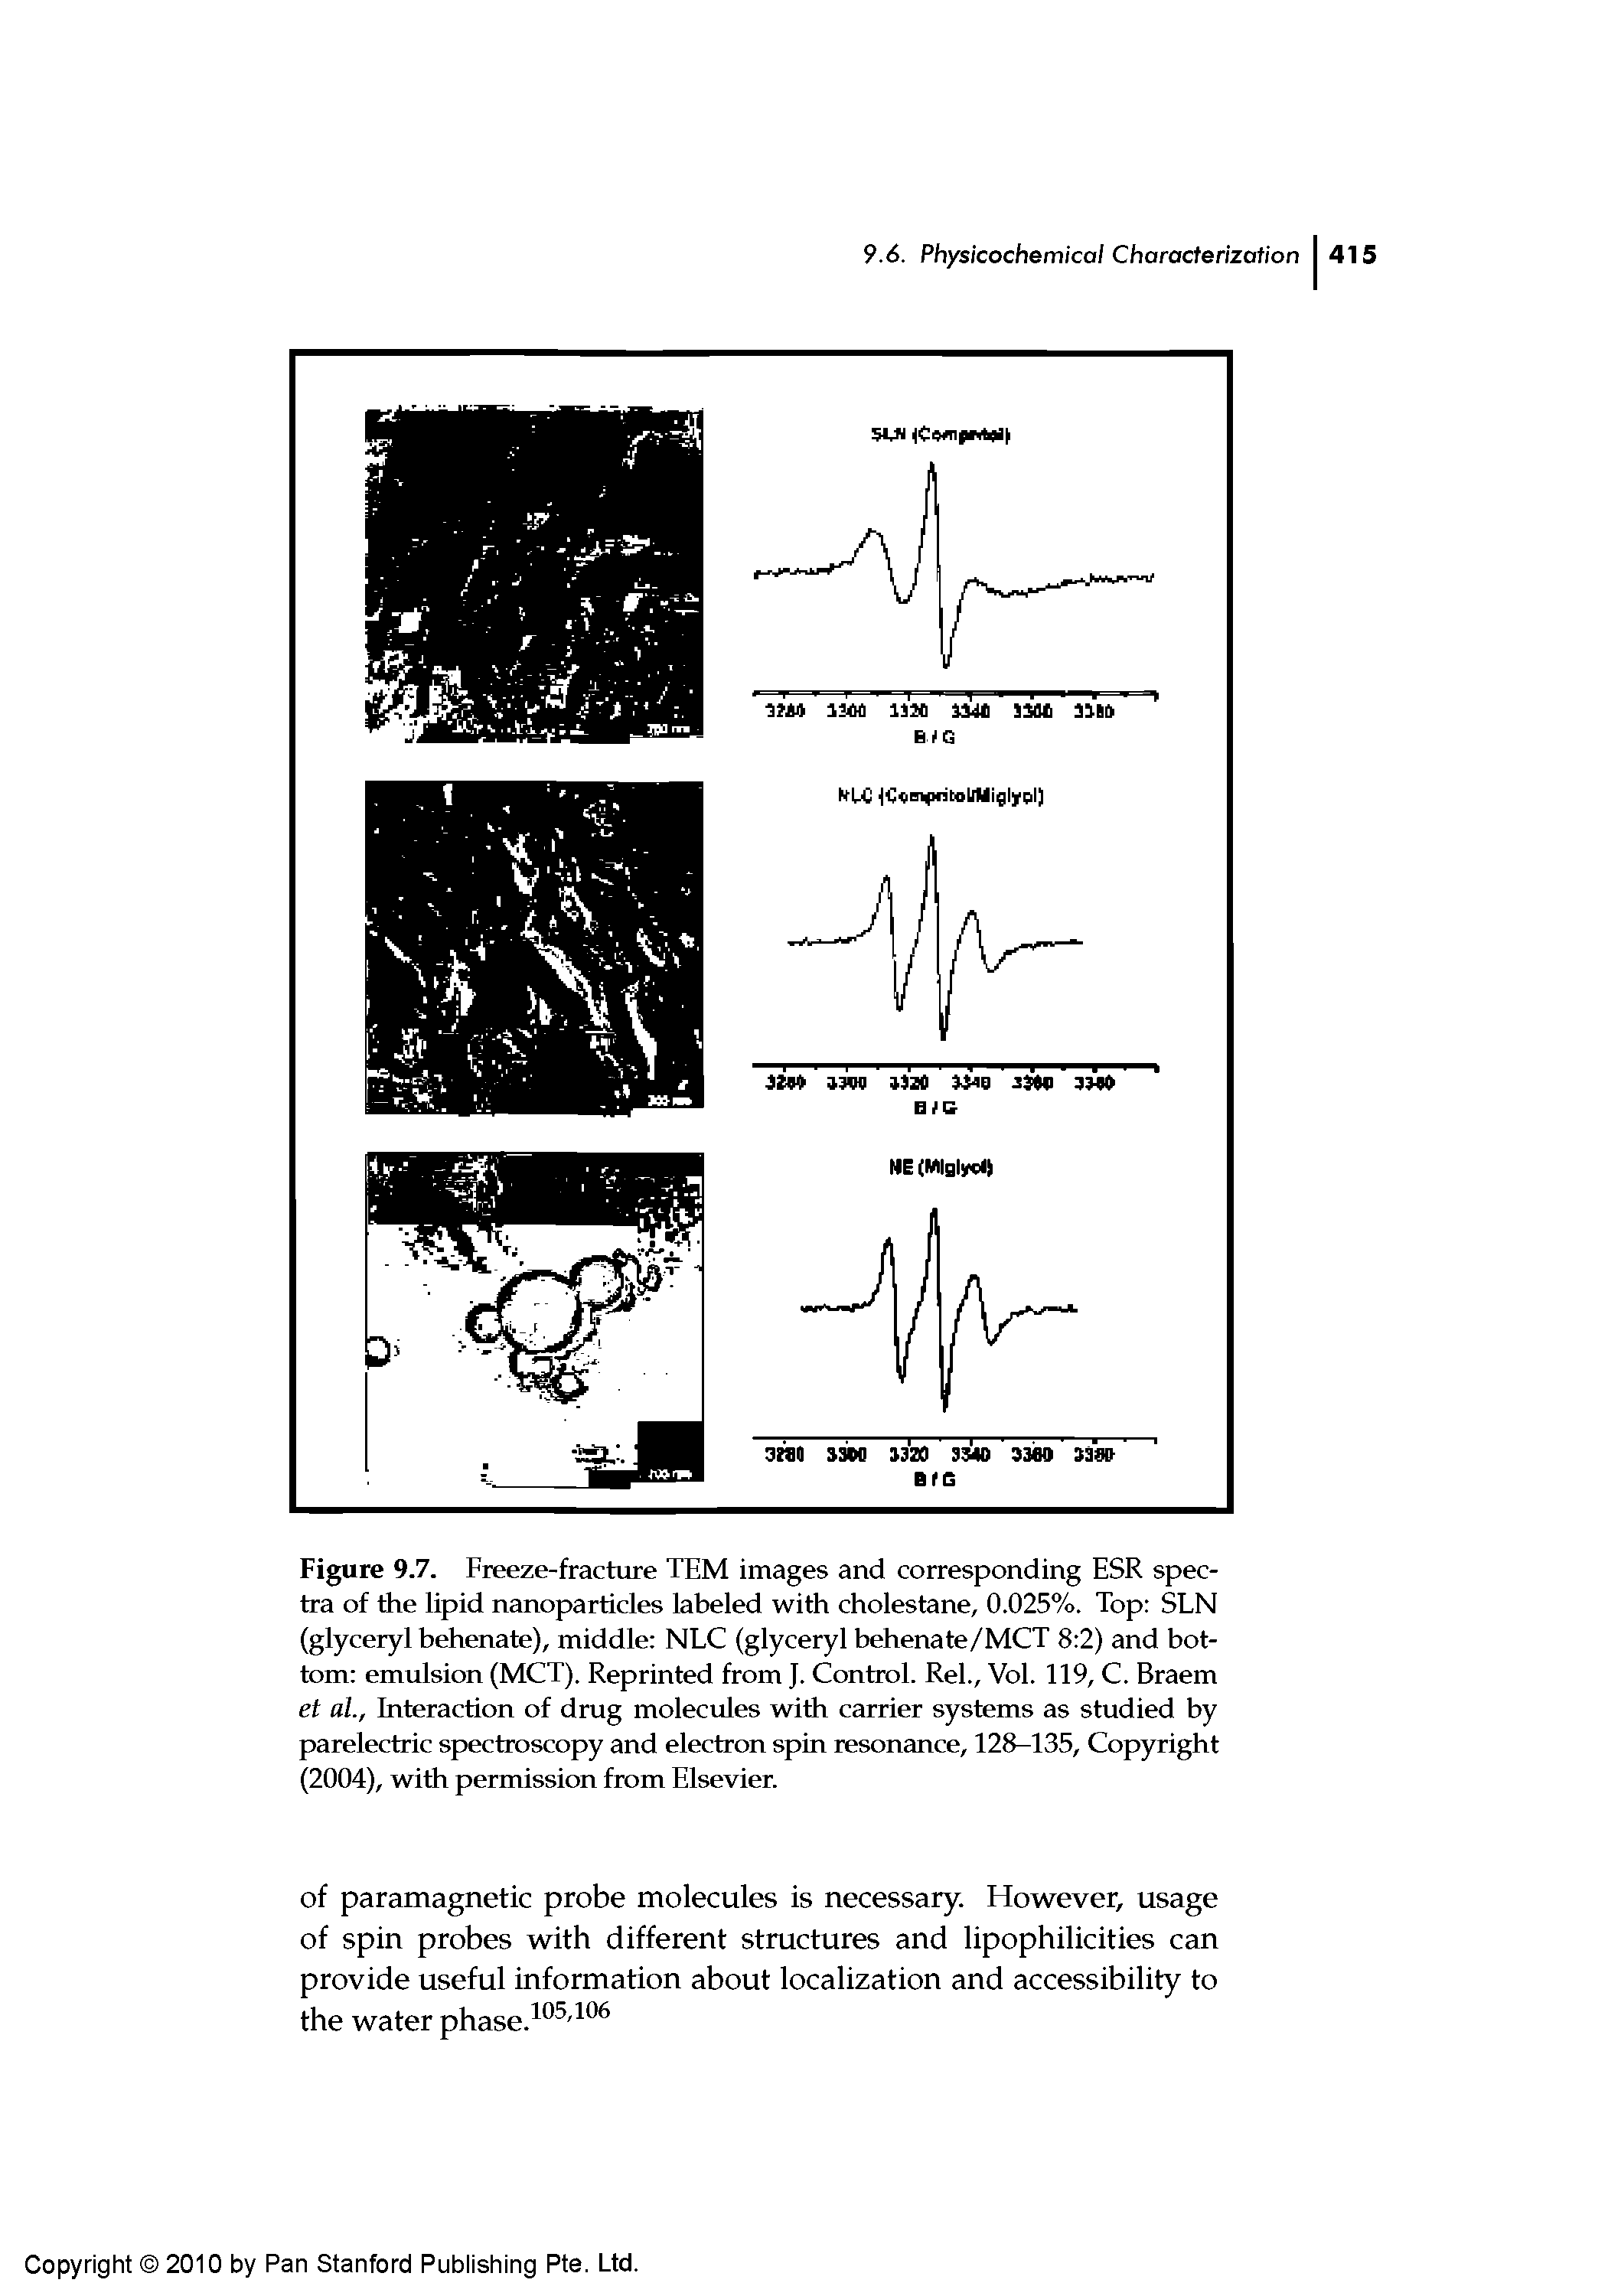 Figure 9.7. Freeze-fracture TEM images and corresponding ESR spectra of the lipid nanoparticles labeled with cholestane, 0.025%. Top SEN (glyceryl behenate), middle NEC (glyceryl behenate/MCT 8 2) and bottom emulsion (MCT). Reprinted from J. Control. Rel., Vol. 119, C. Braem et al., Interaction of drug molecules with carrier systems as studied by parelectric spectroscopy and electron spin resonance, 128-135, Copyright (2004), with permission from Elsevier.